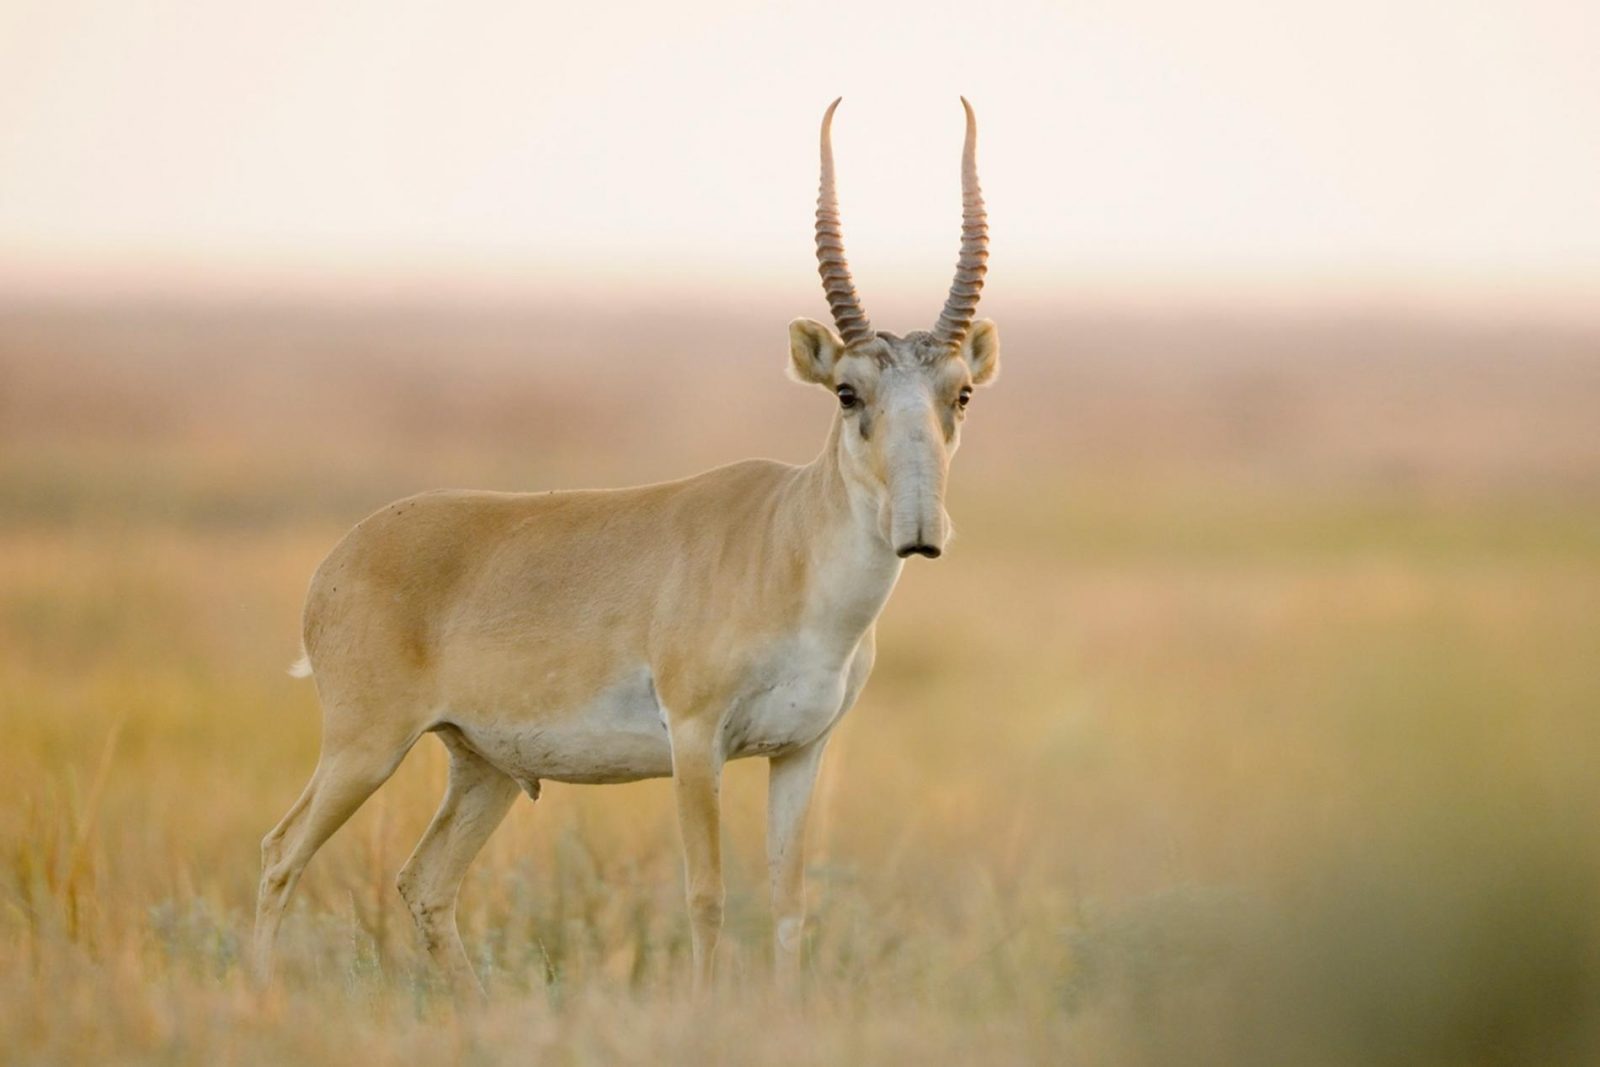 Can You Match 16 of Animals to Their Native Continent? Quiz 01 Saiga Antelope Asia